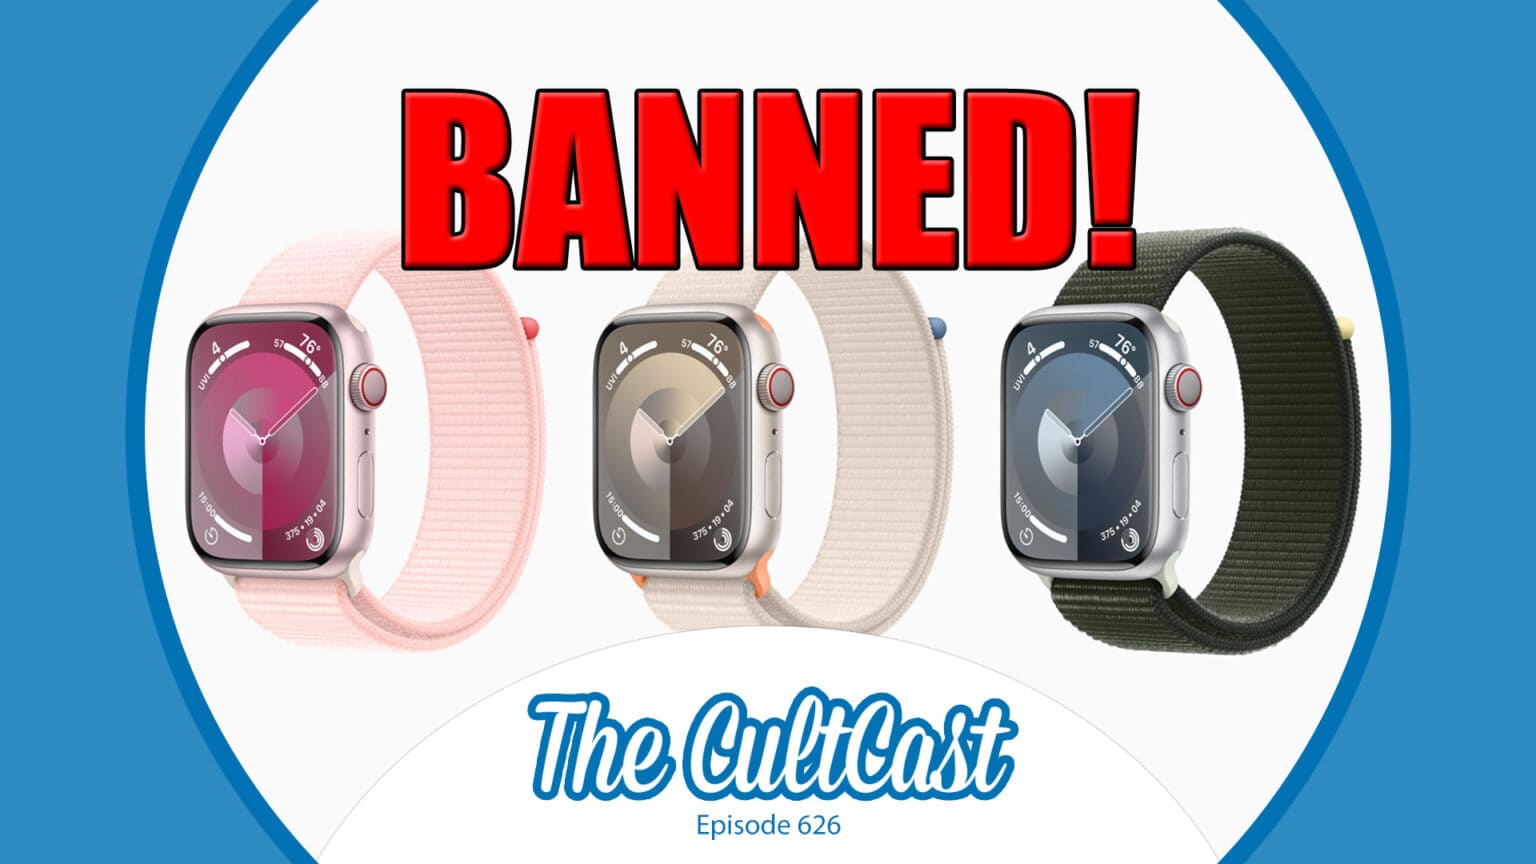 Apple Watch banned - The CultCast episode 626